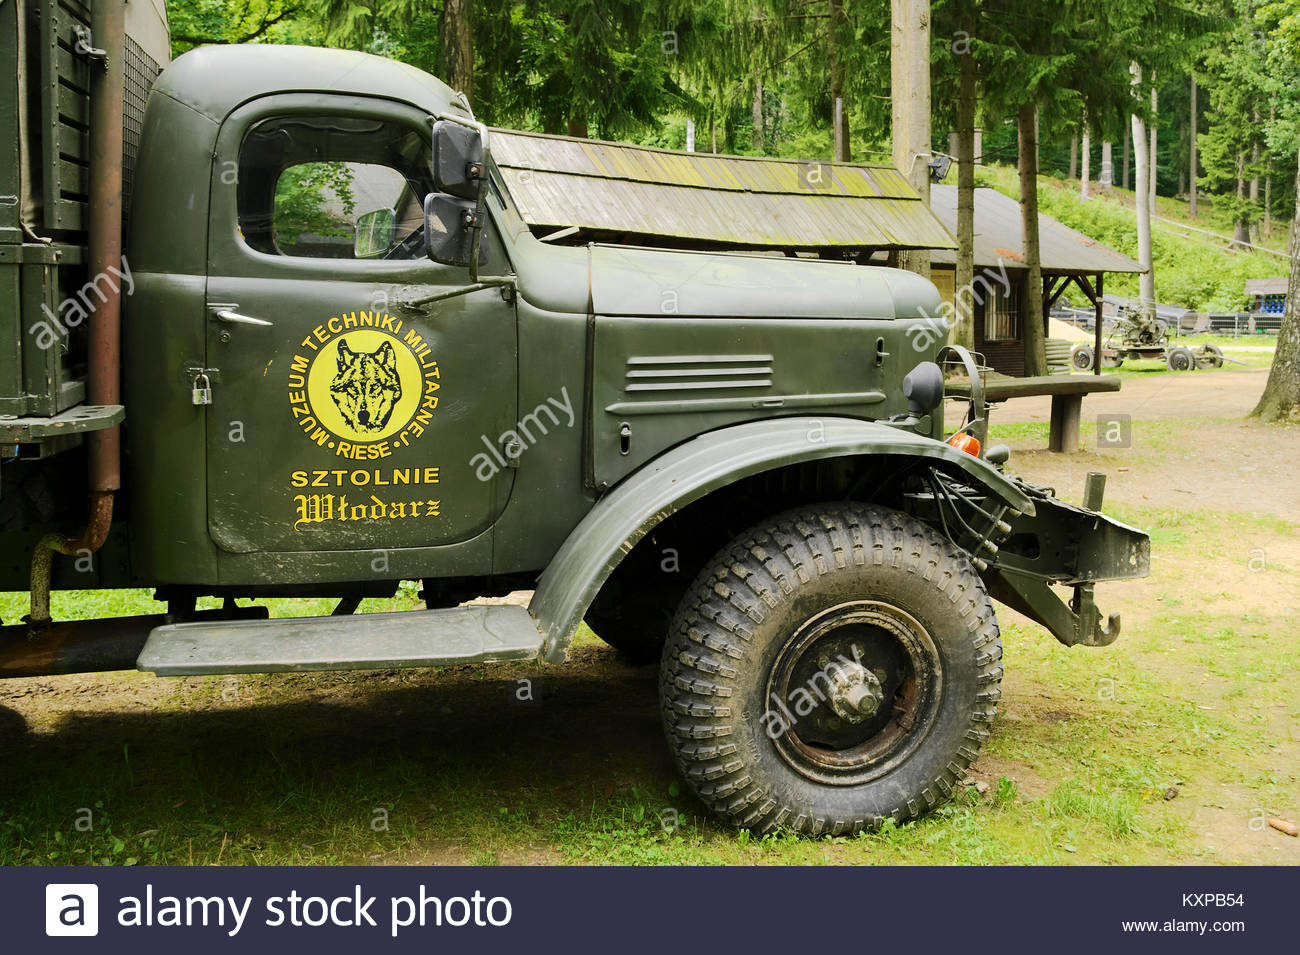 historic-soviet-zil-157-6x6-army-truck-on-exhibition-in-project-riese-KXPB54.jpg